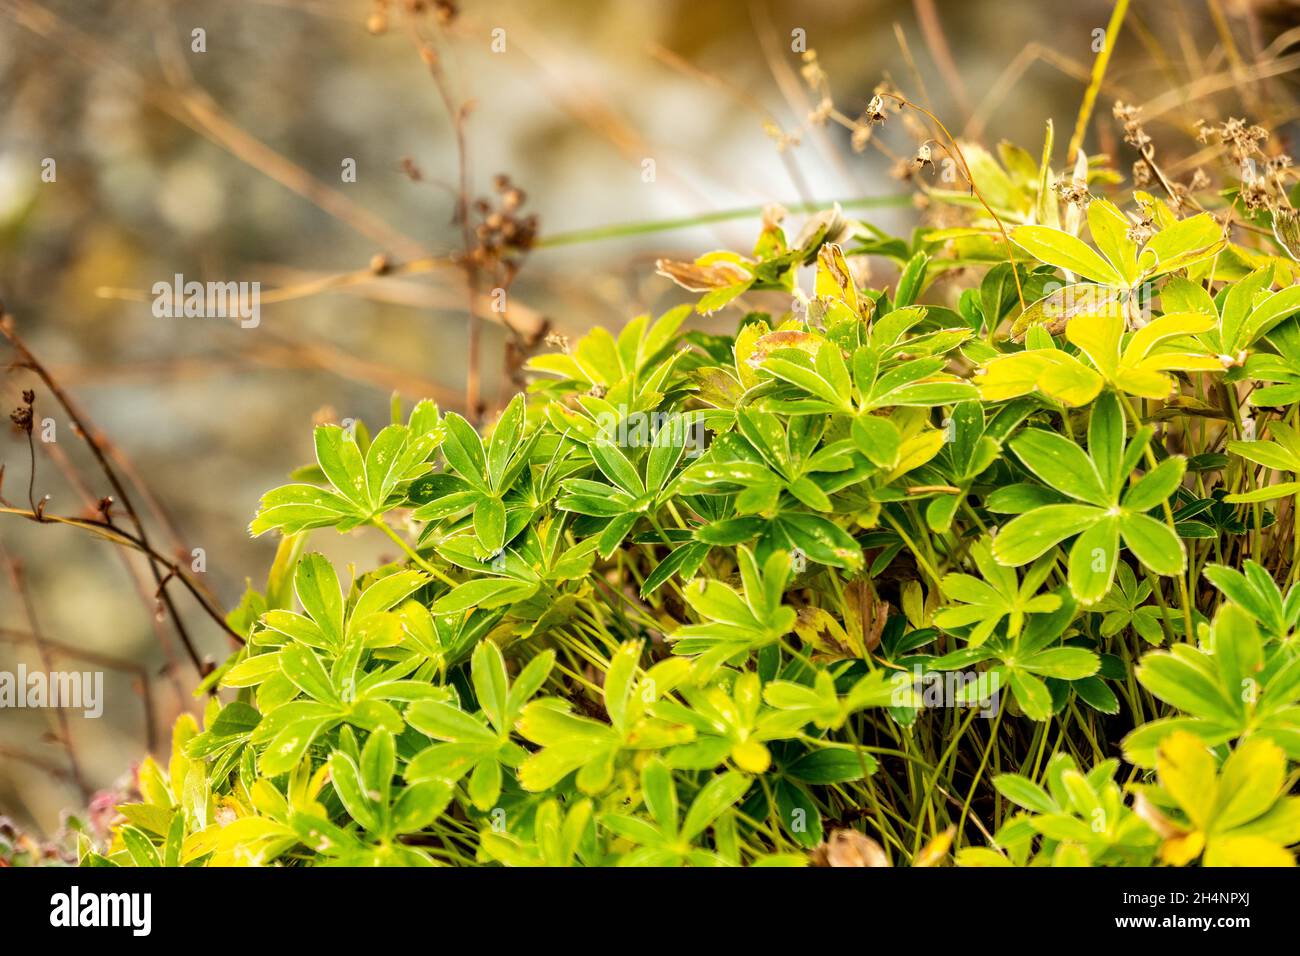 Ladys Mantle or Alchemilla growing in the Alps in Front of a Crook Stock Photo